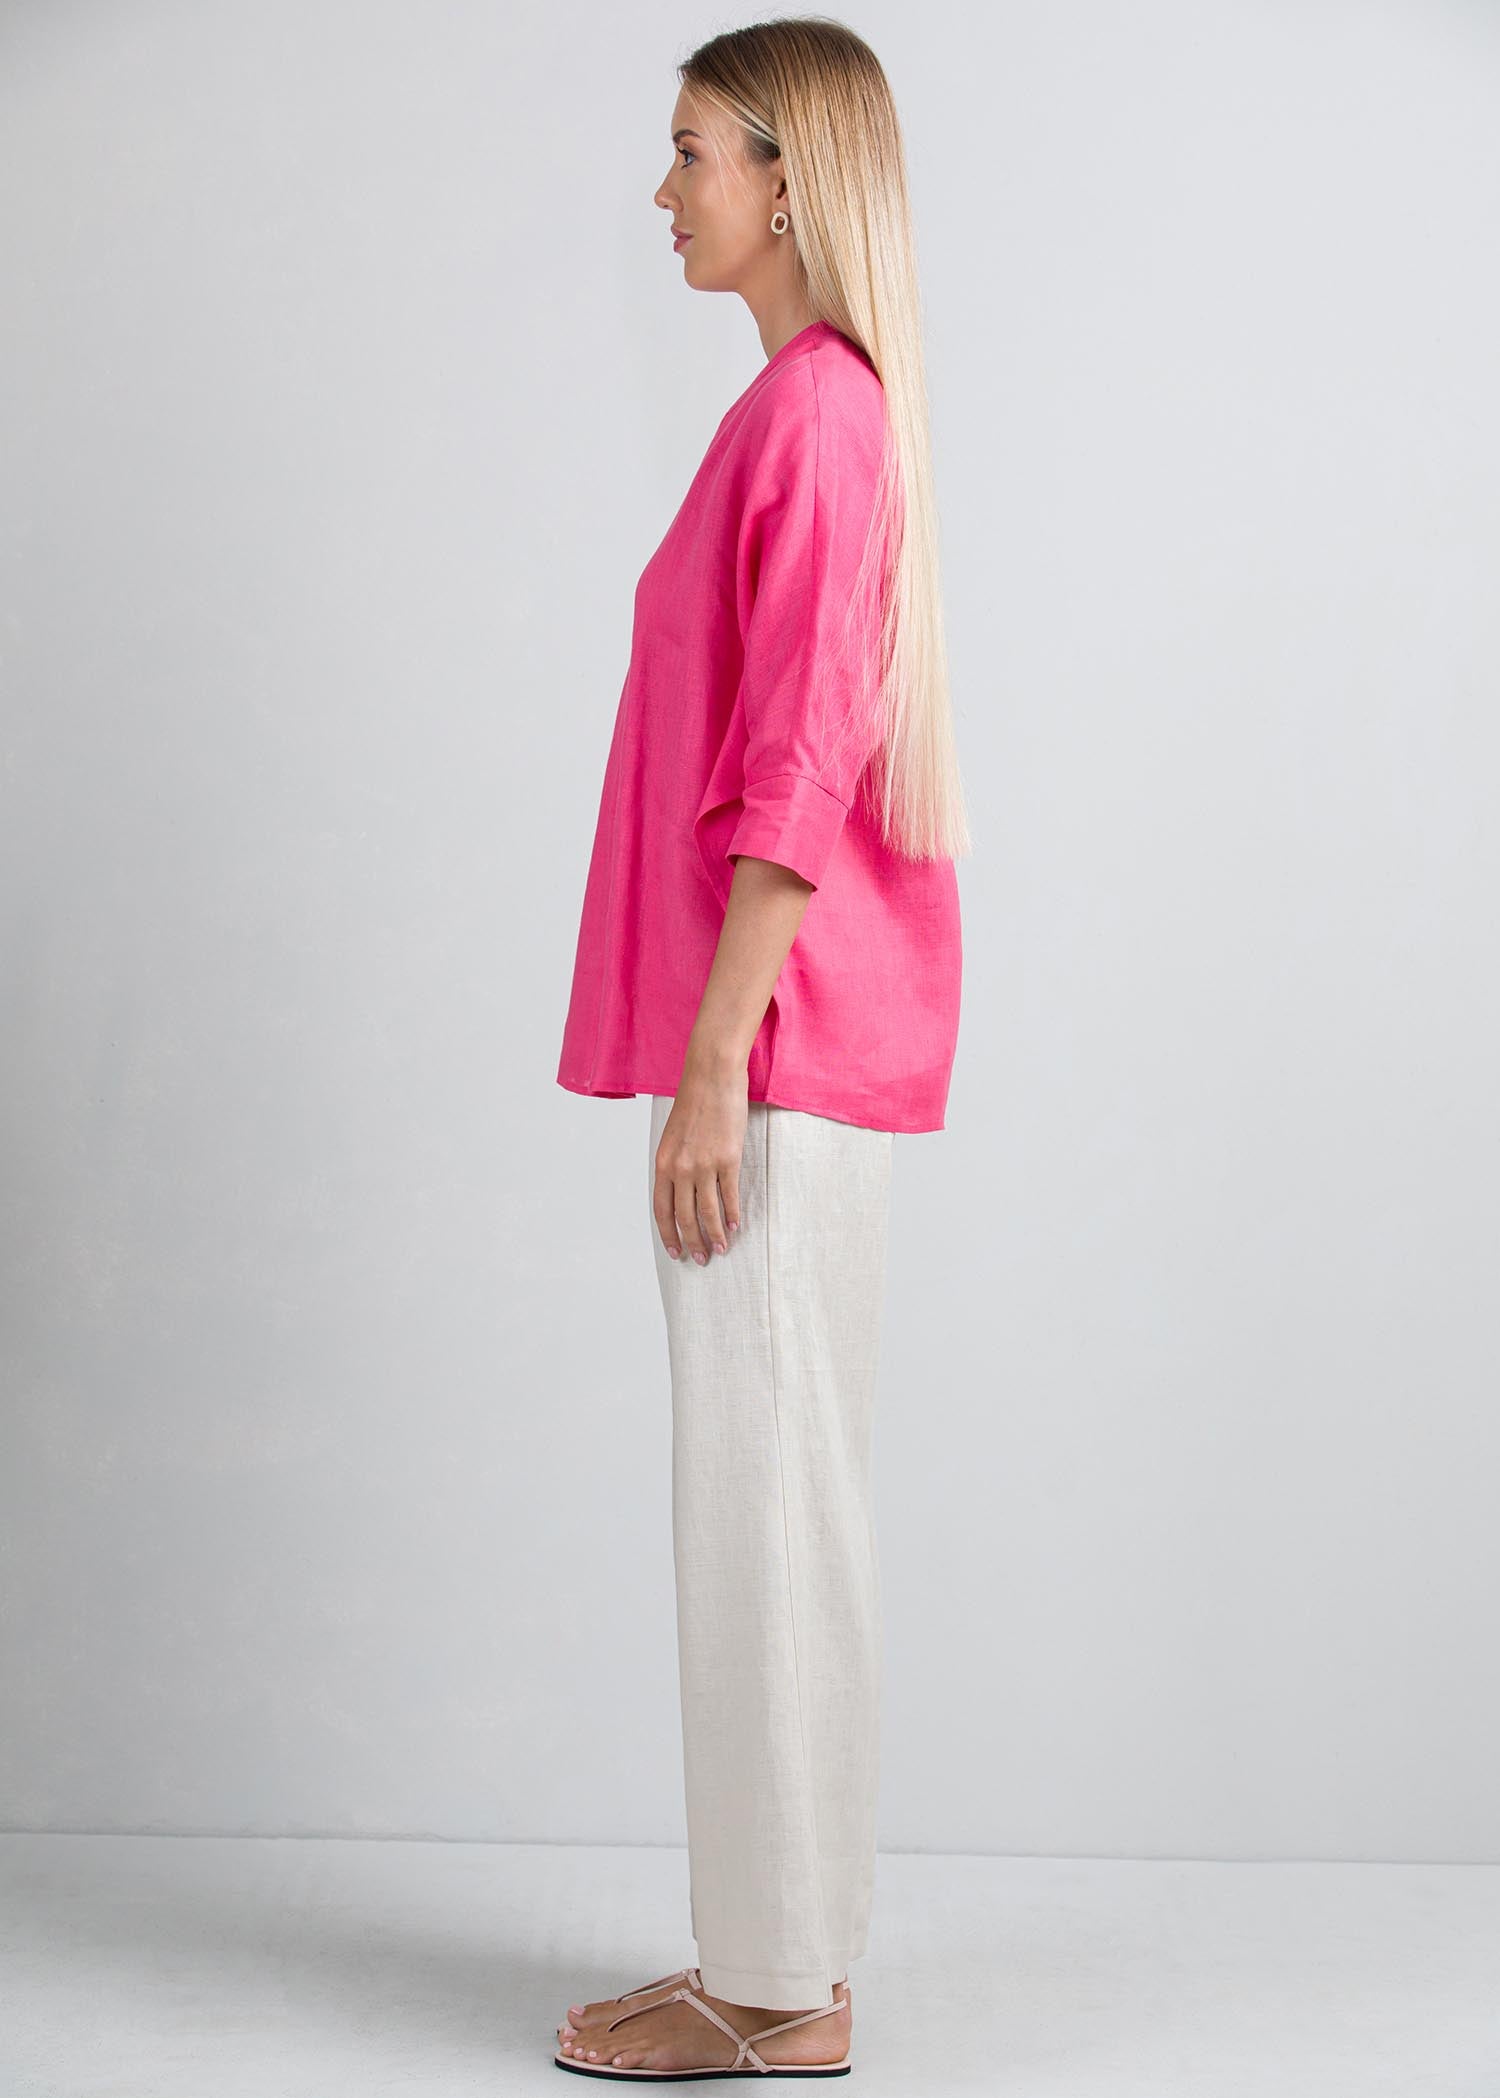 Oversized blouse with front pleat